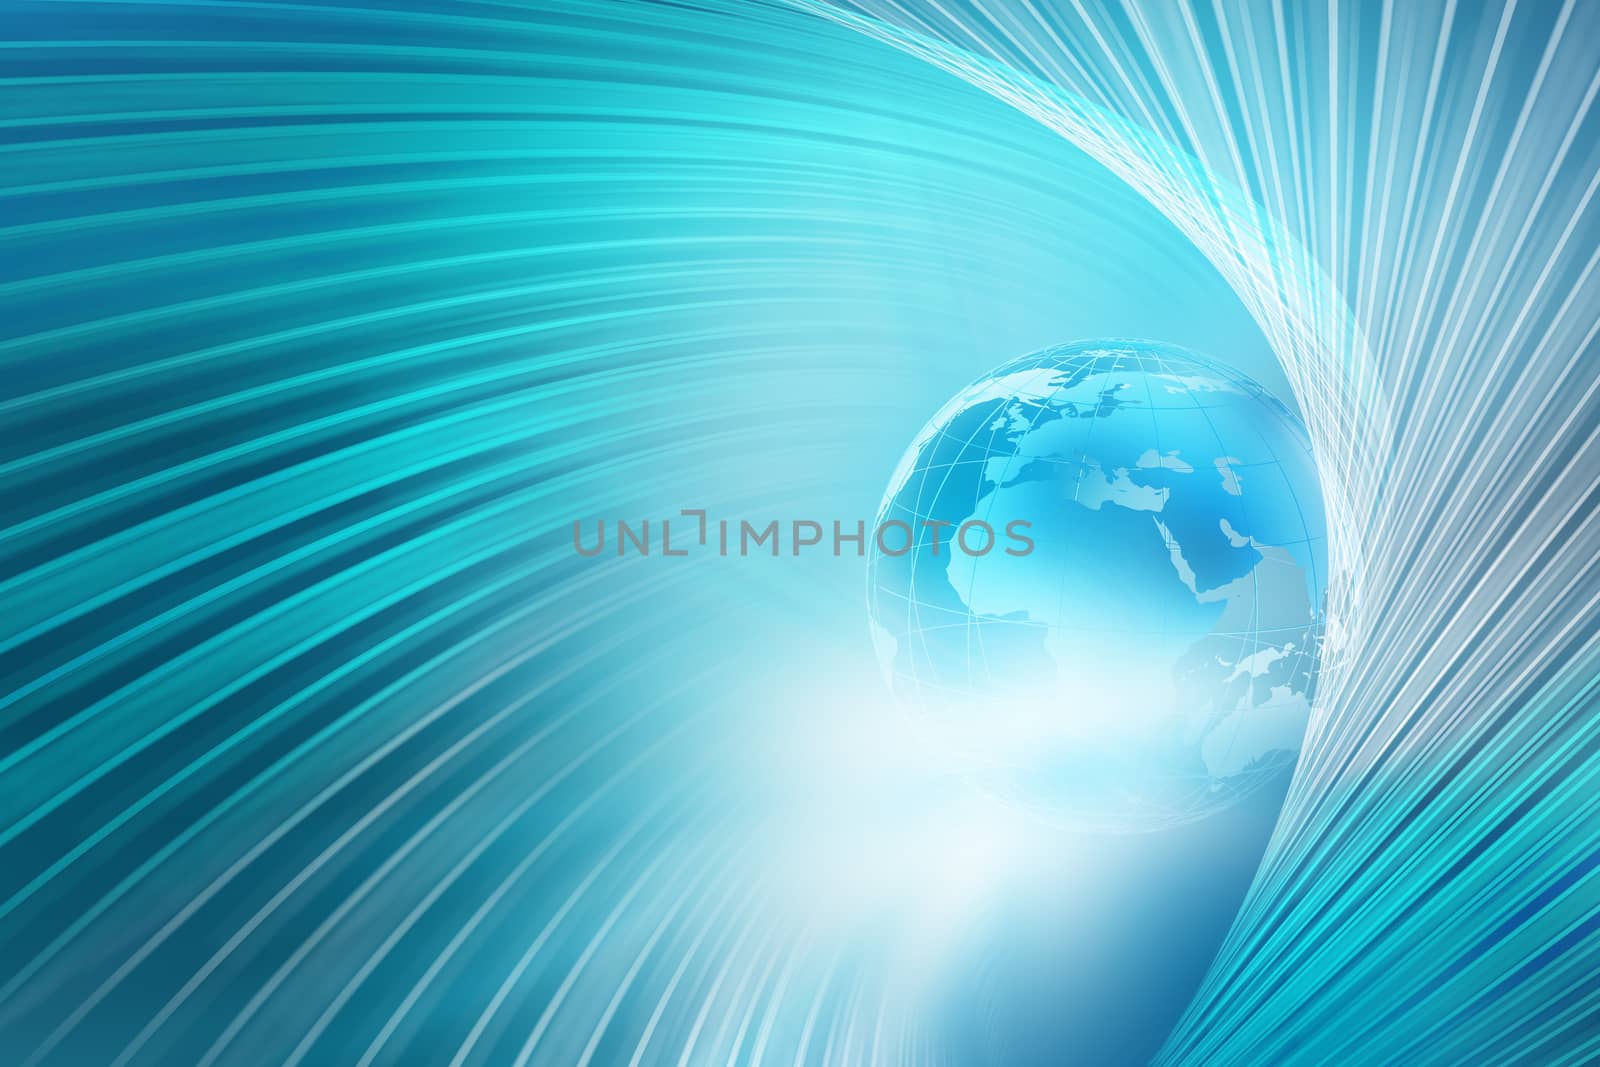 Abstract Global Connection Background. Illustration of  Futuristic Networking Technology Concept. Blank Space for Your Contents, Template, Communication, Business and Web Design